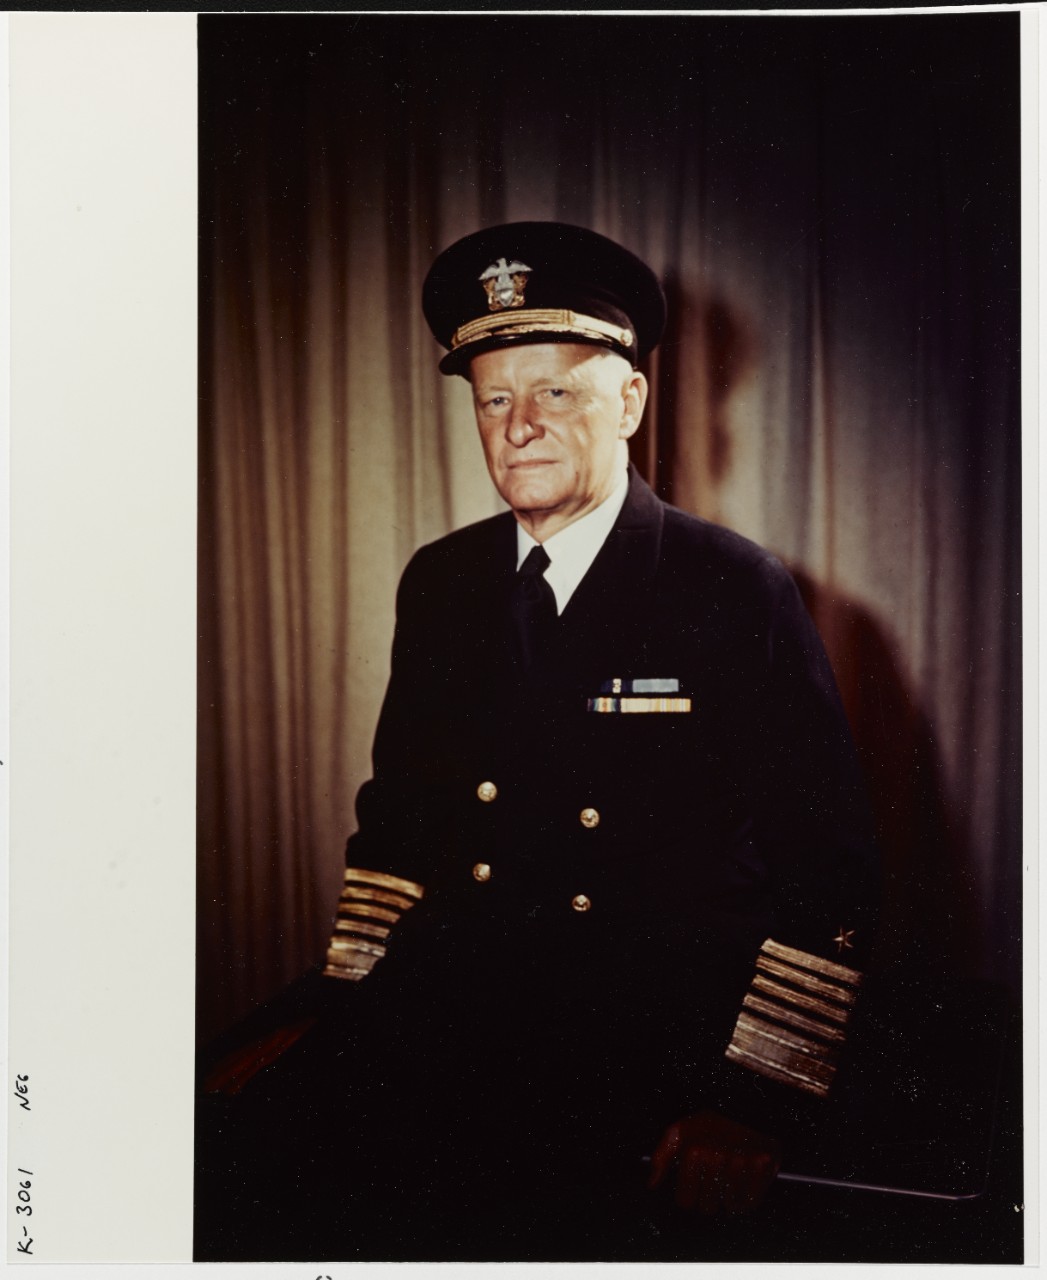 Photographed at the Navy Department , Washington, D.C., in March 1945.